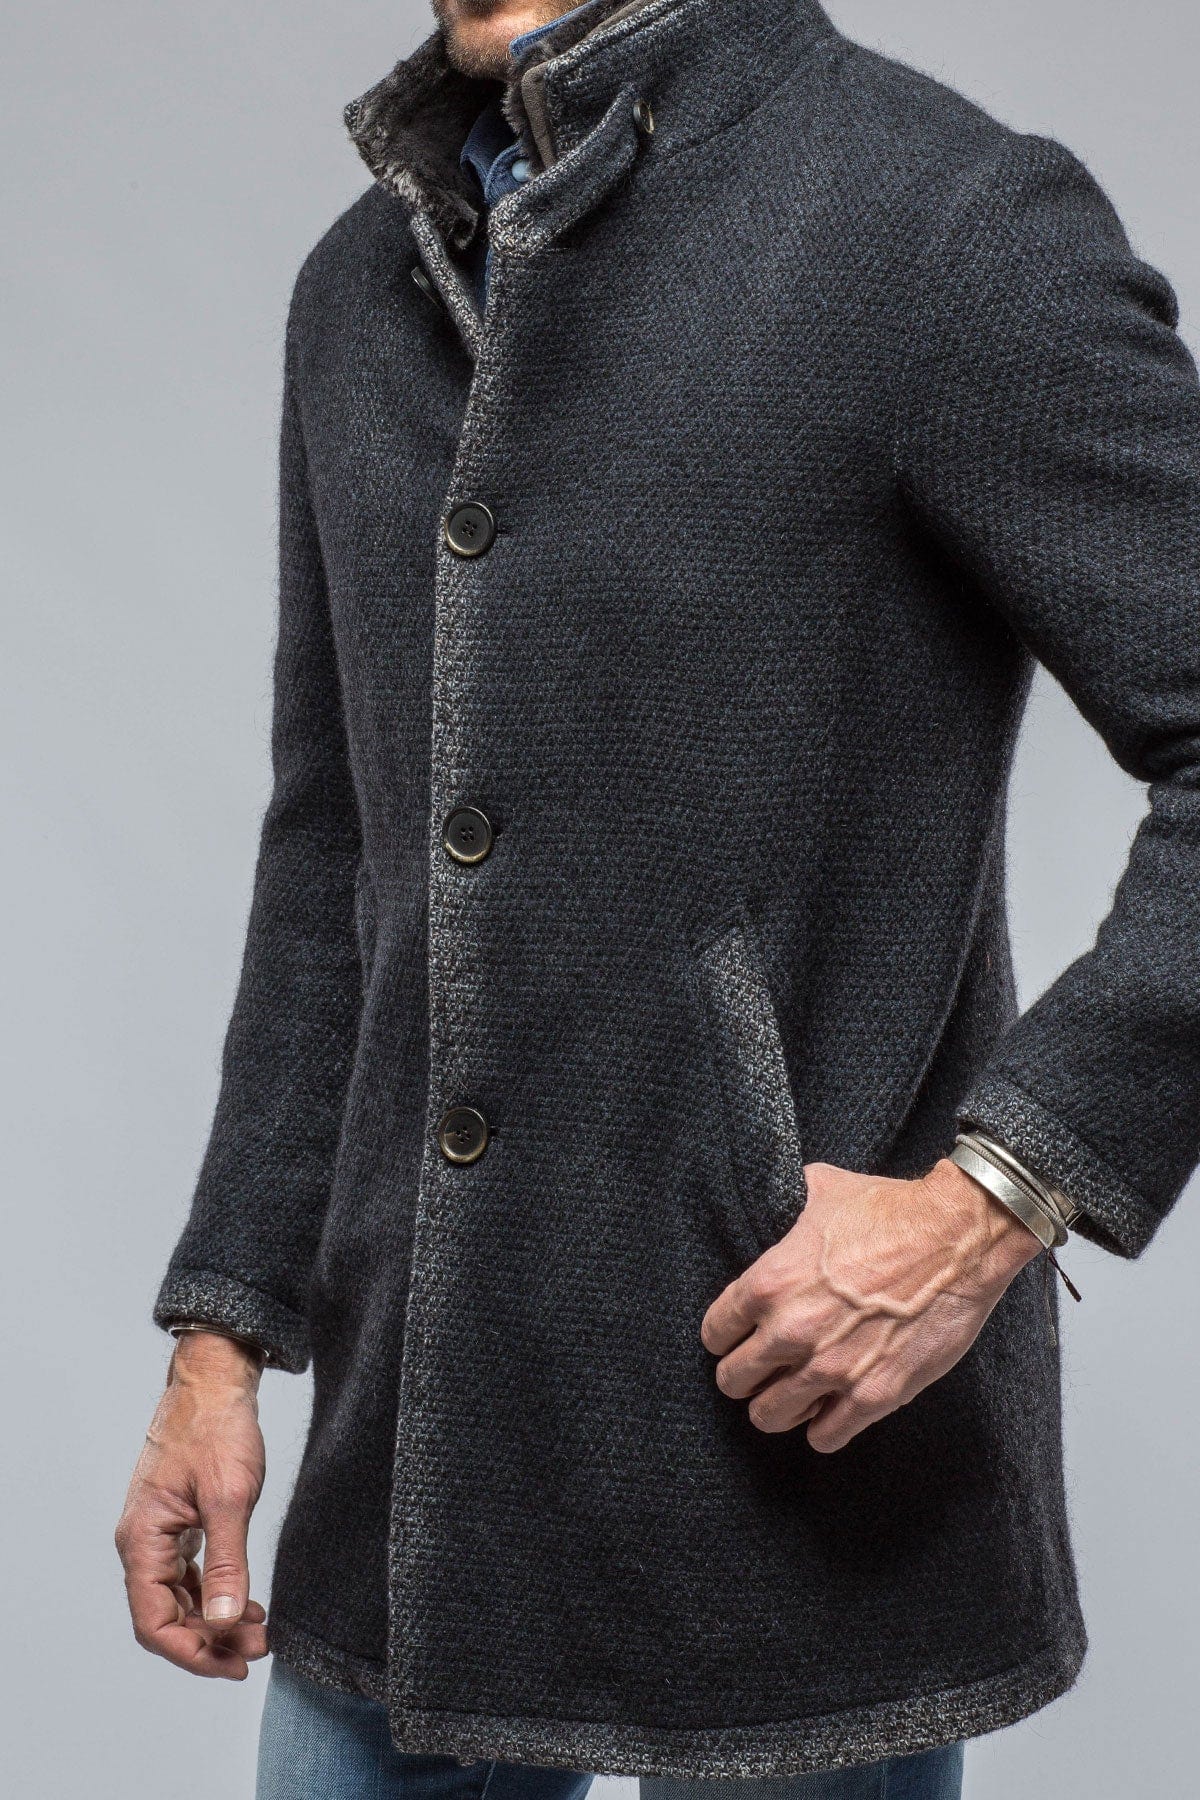 Winston Shearling Trim Coat in Washed Navy - AXEL'S